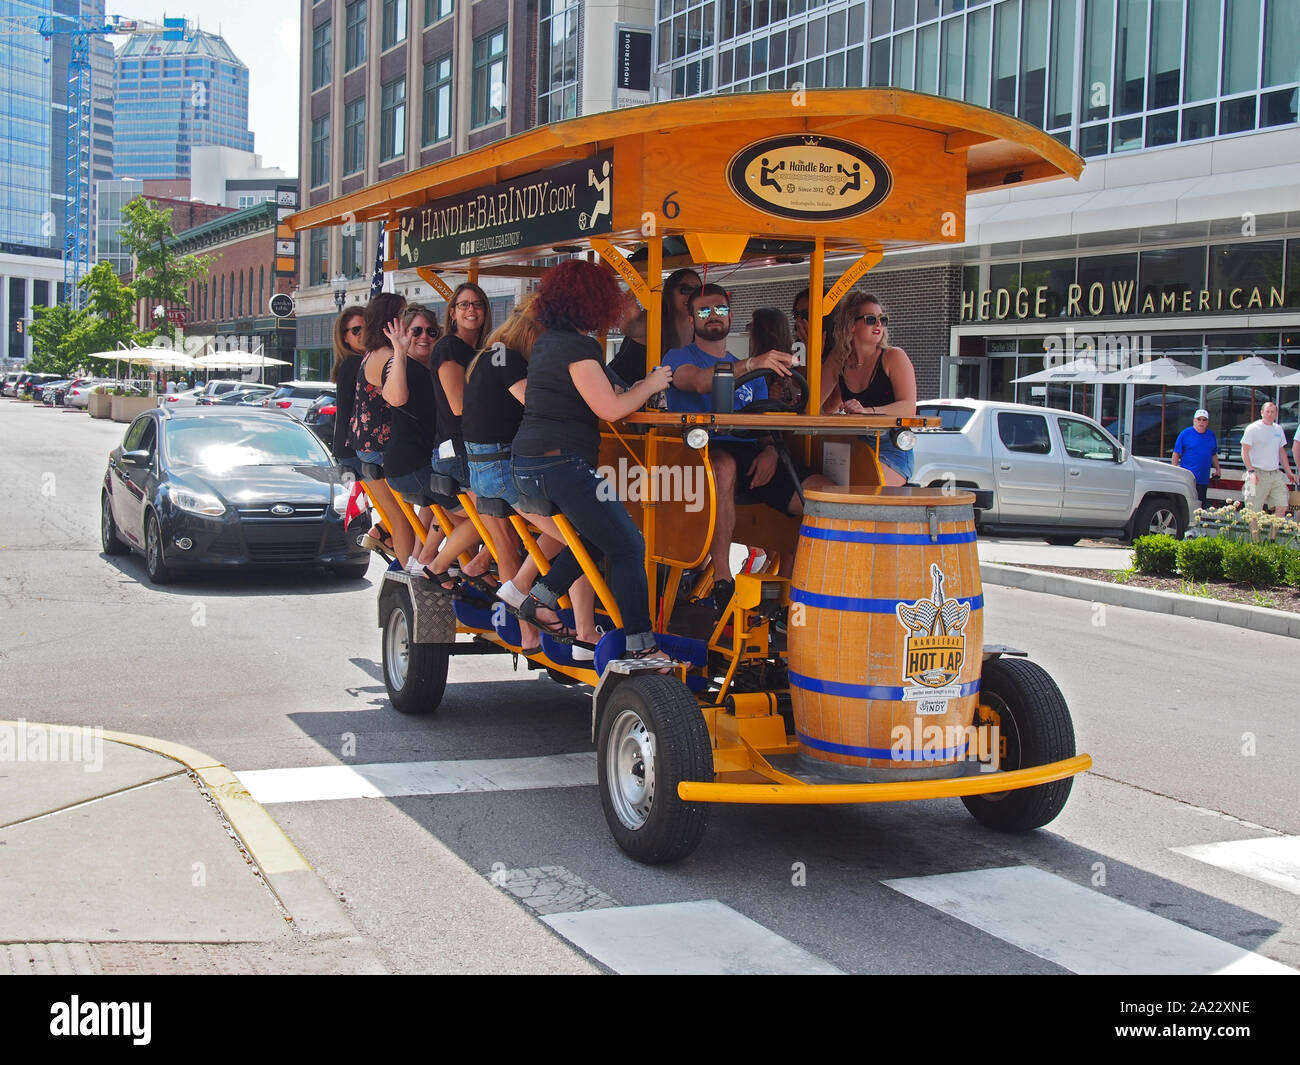 A group of women having fun and drinking beer while pedaling the bicycle pub Handlebar Indy along Mass Ave, one of the six designated cultural distric Stock Photo